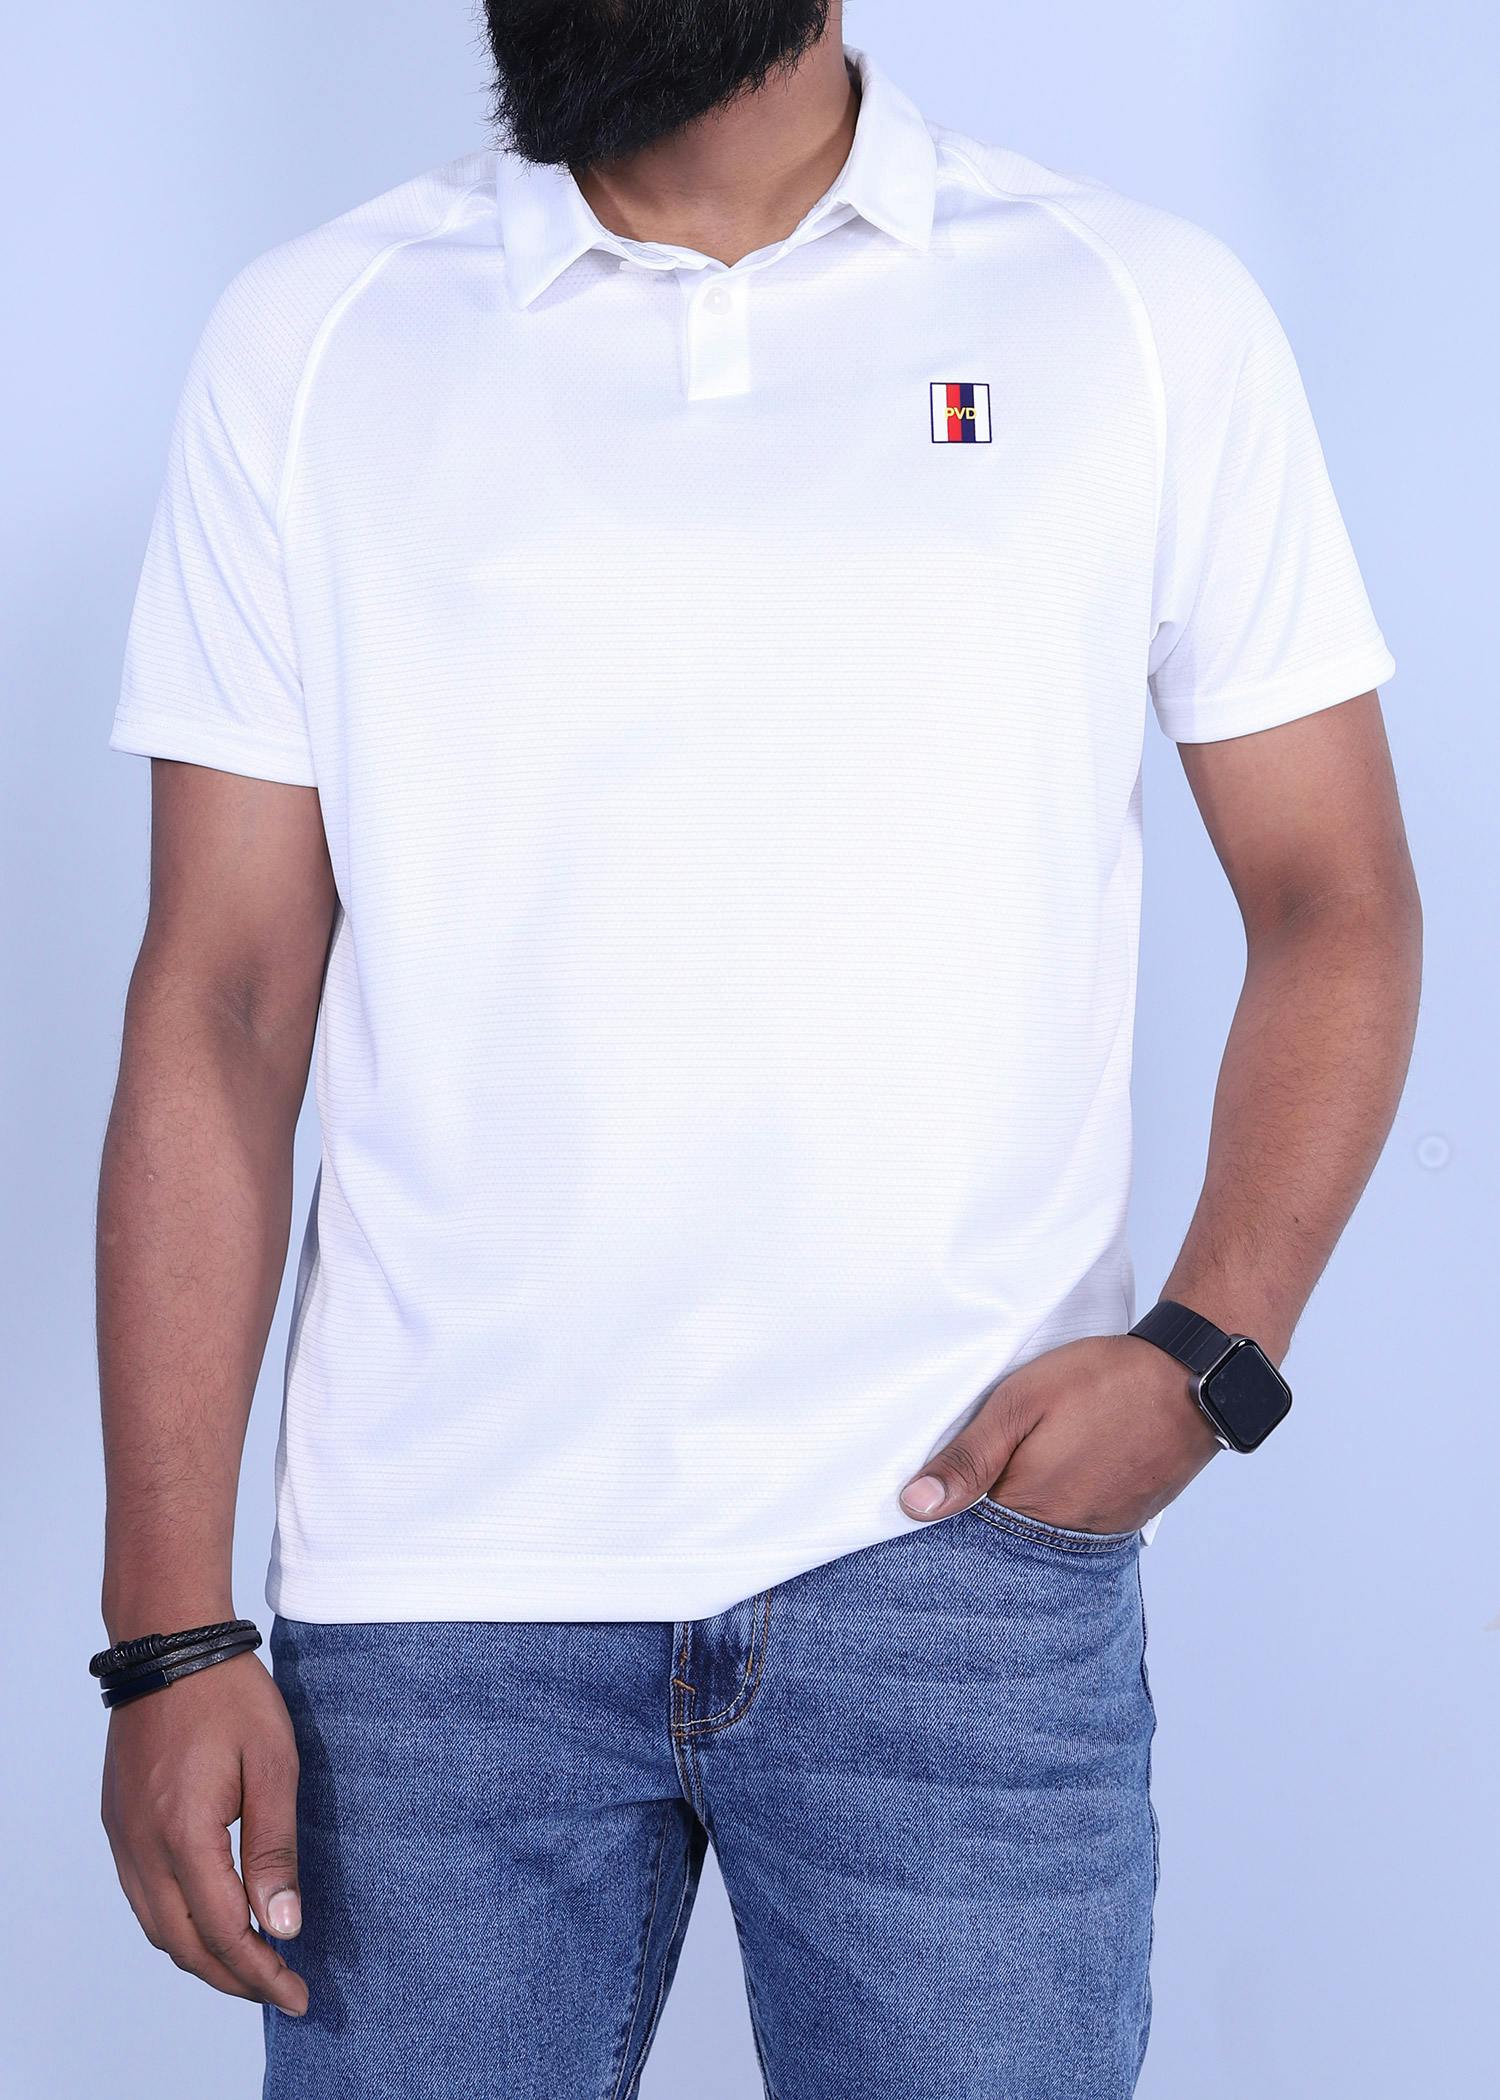 holfman polo white color half front view